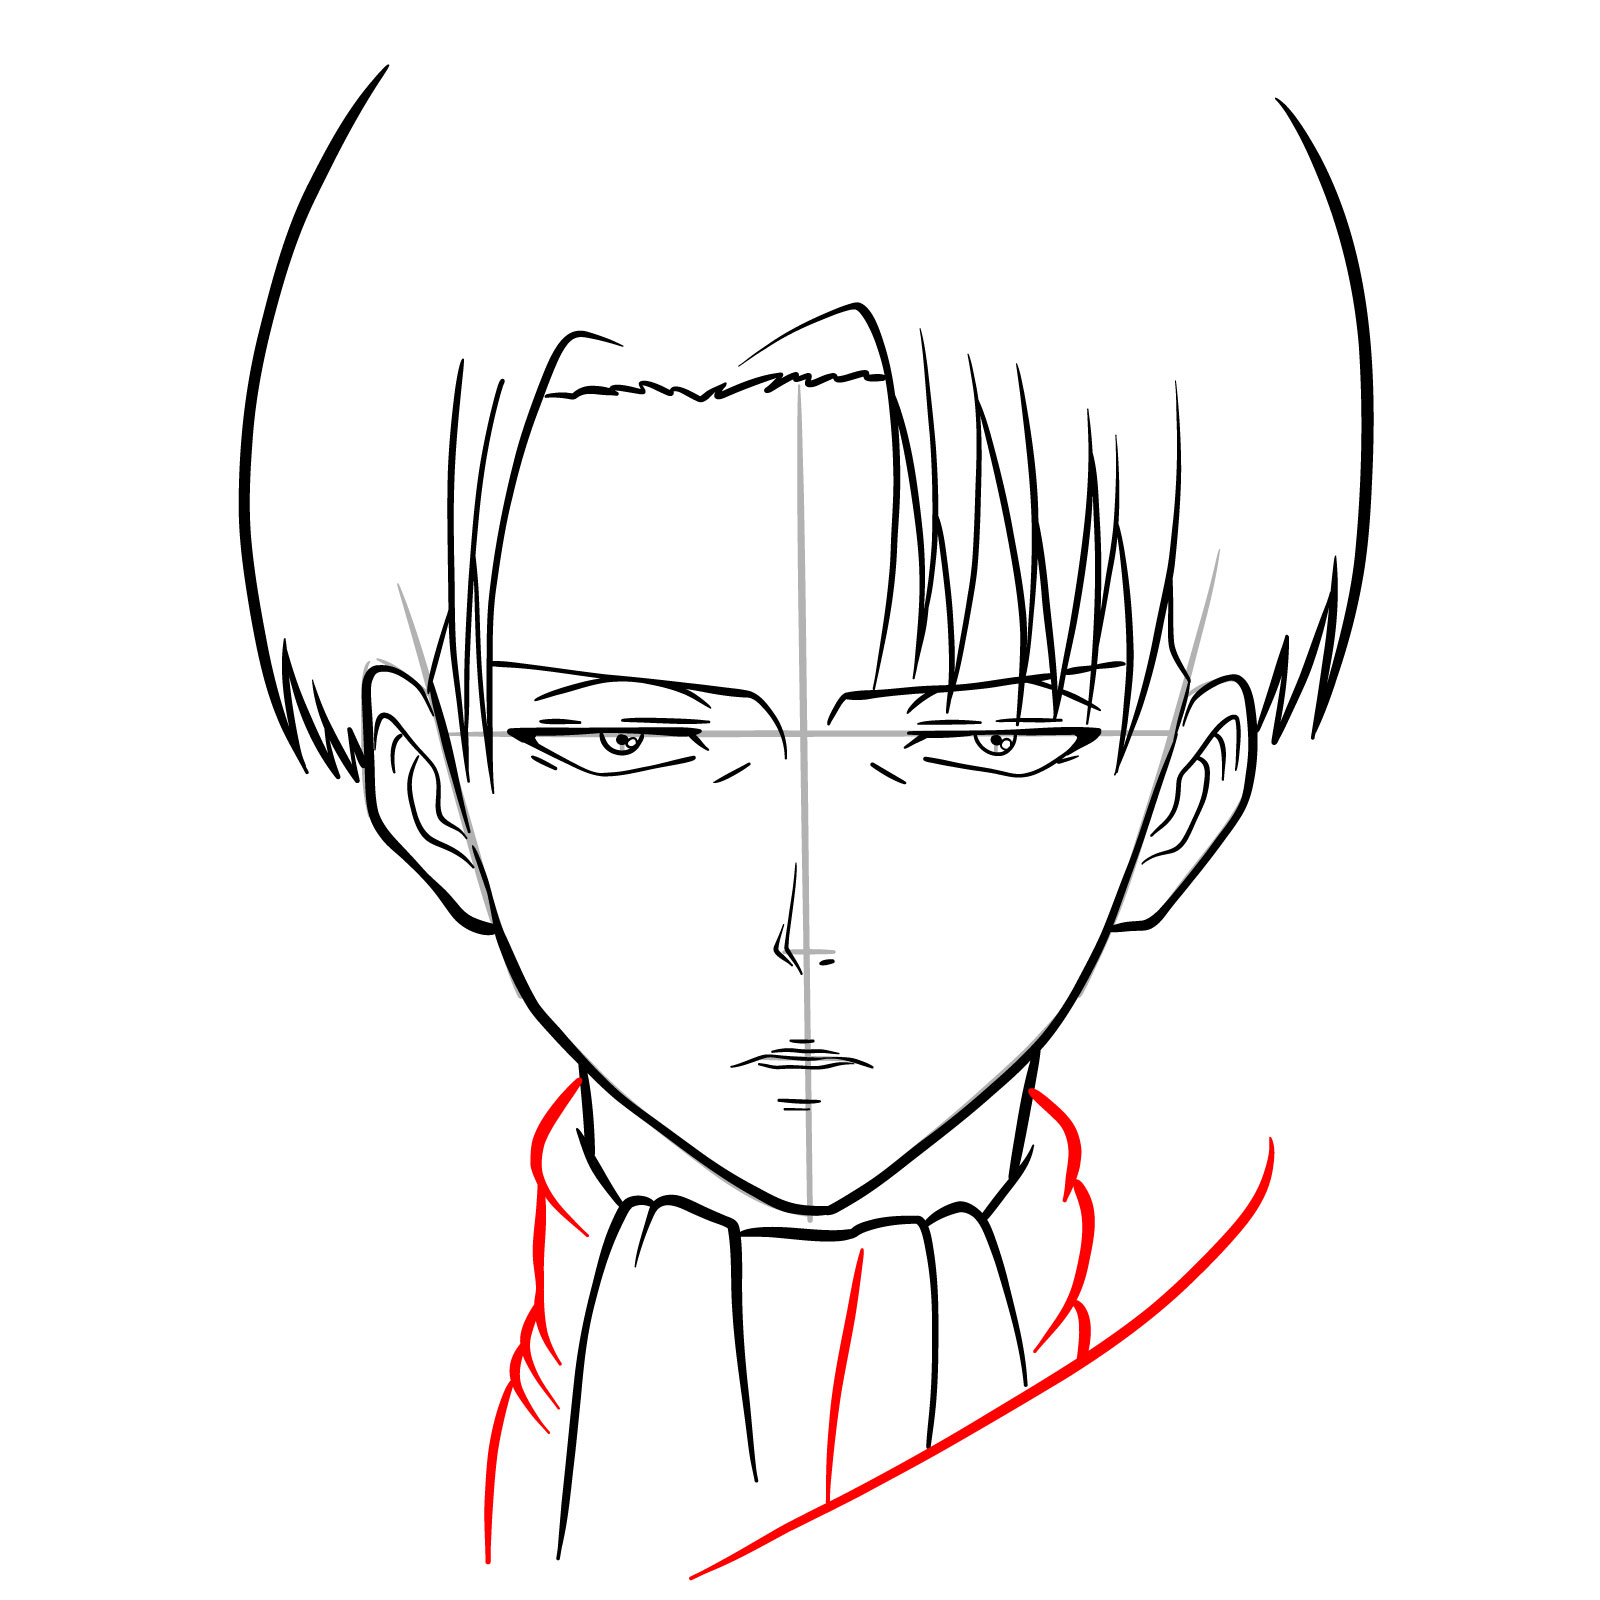 Continuing the collar in Levi Ackerman's front view face drawing - step 10